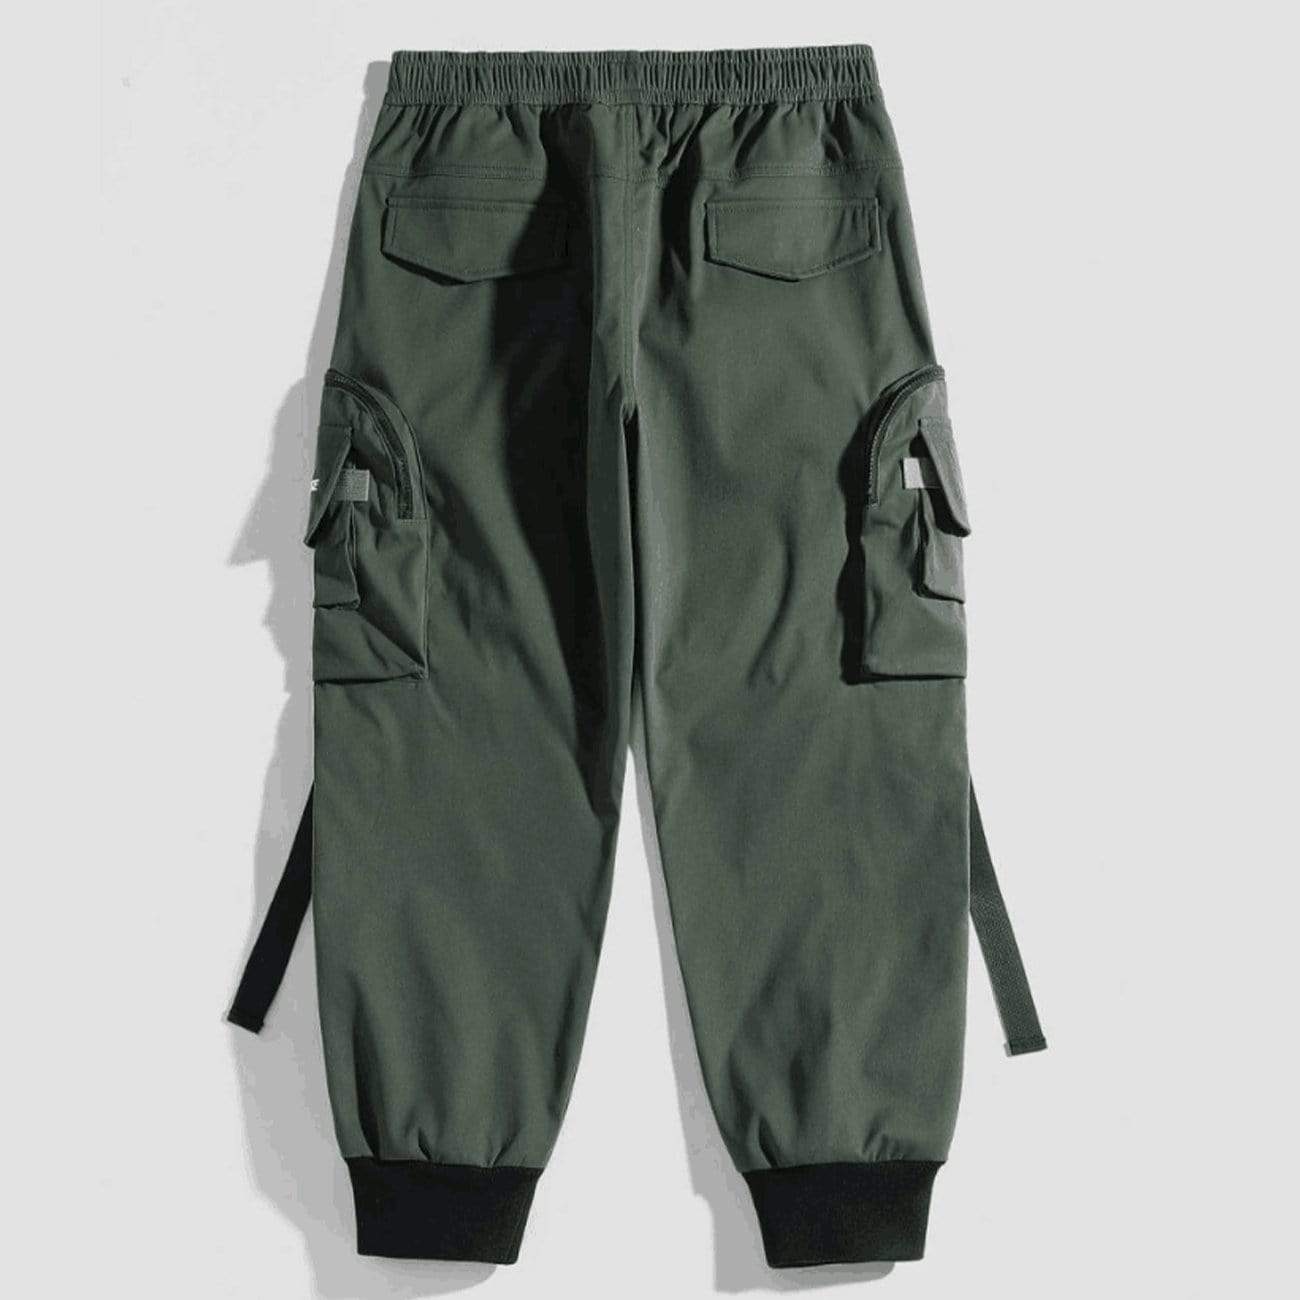 TO Function Buttons Ribbons Zipper Pockets Cargo Pants